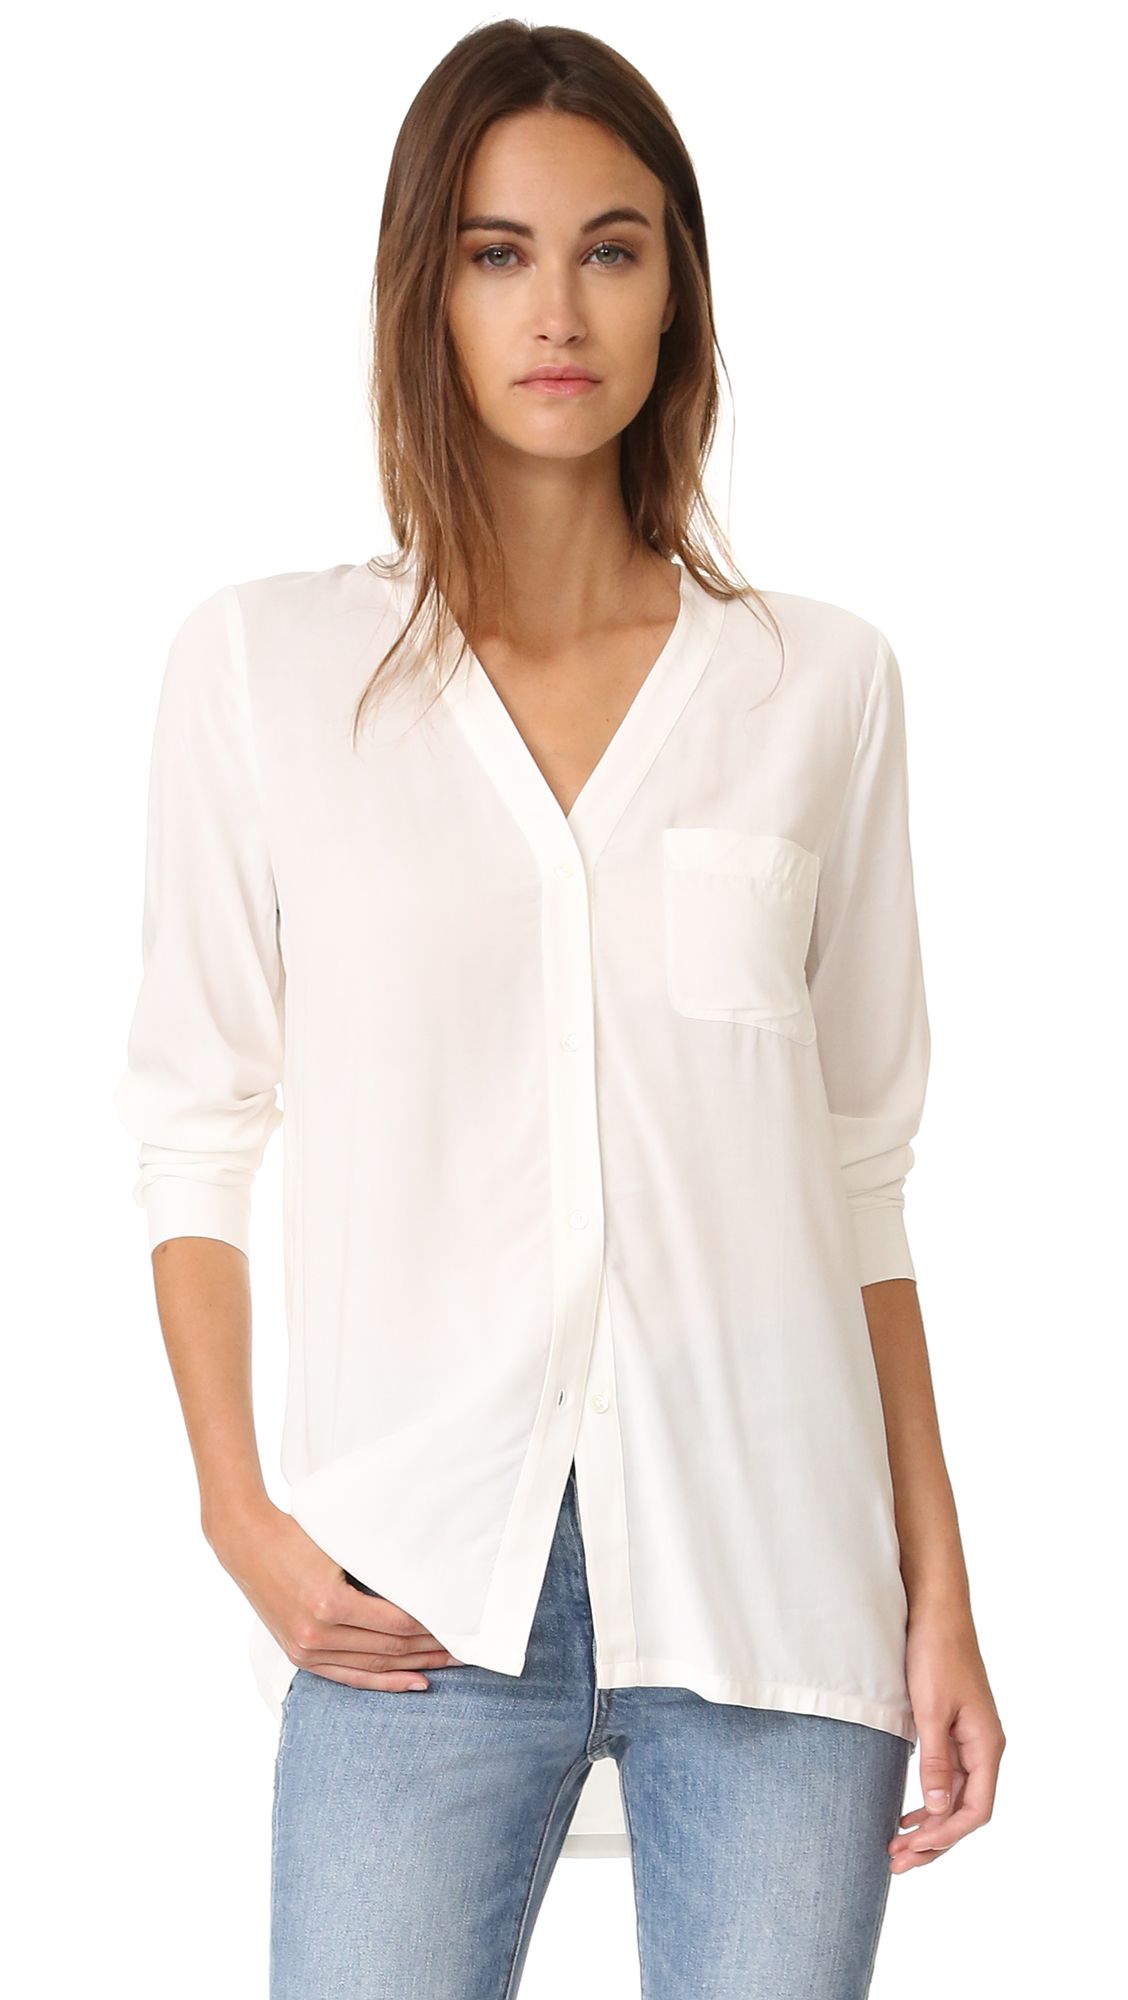 Chasia Top | Shopbop